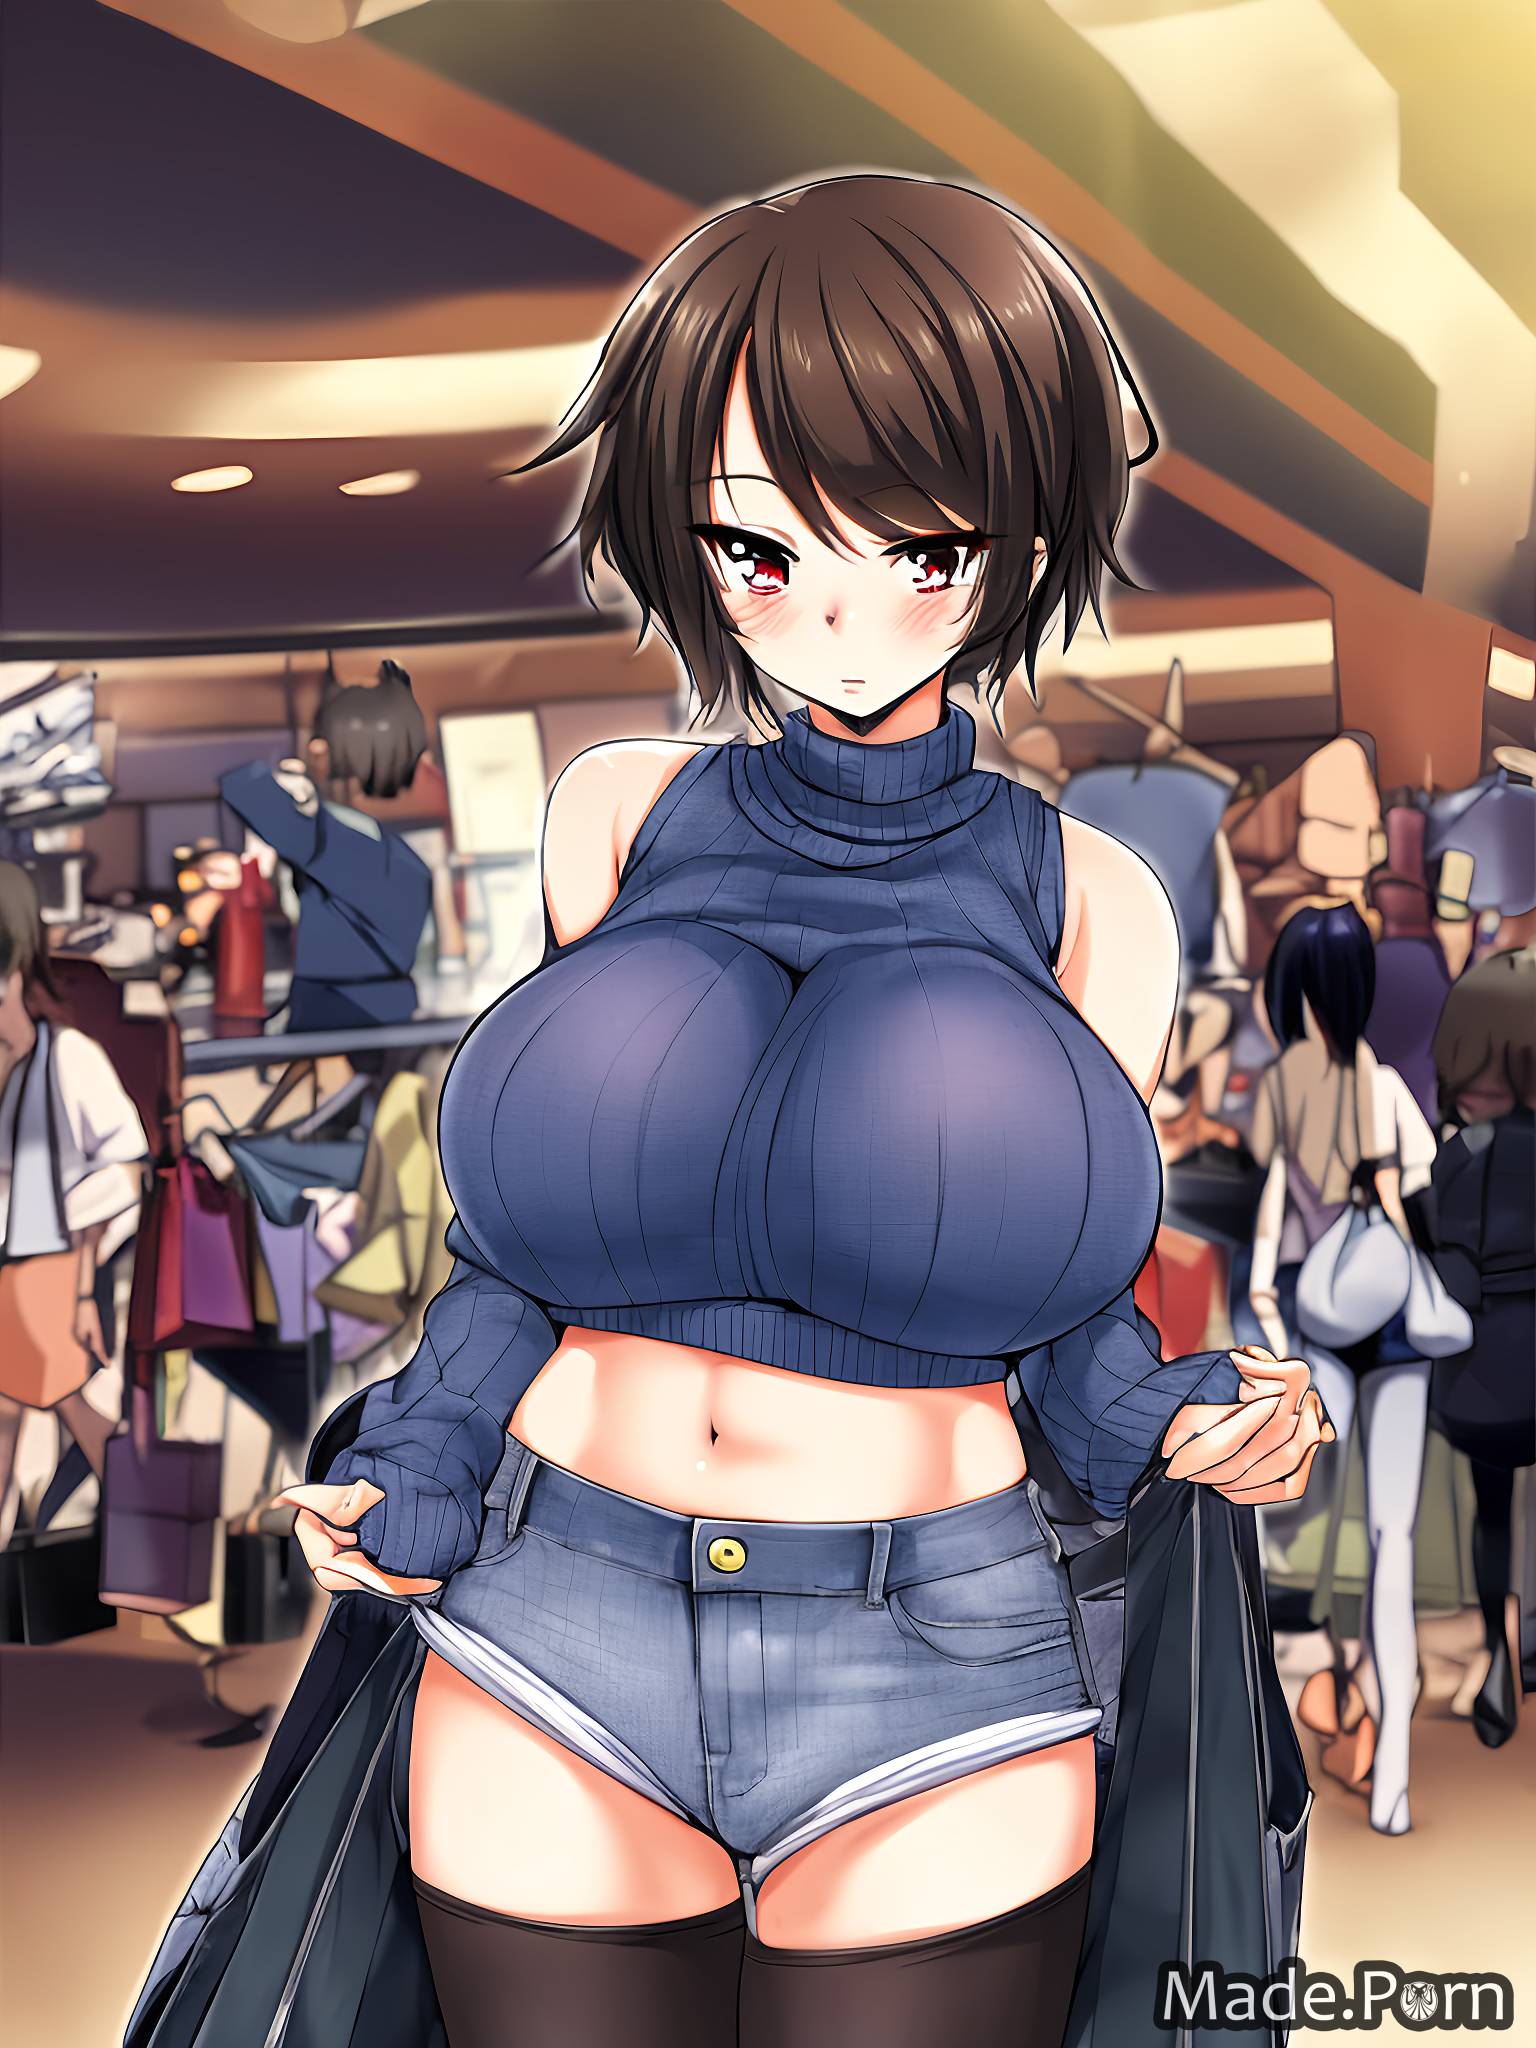 1536px x 2048px - Porn image of 18 daisy dukes sweater chinese messy hair shopping mall Anime  short hair created by AI